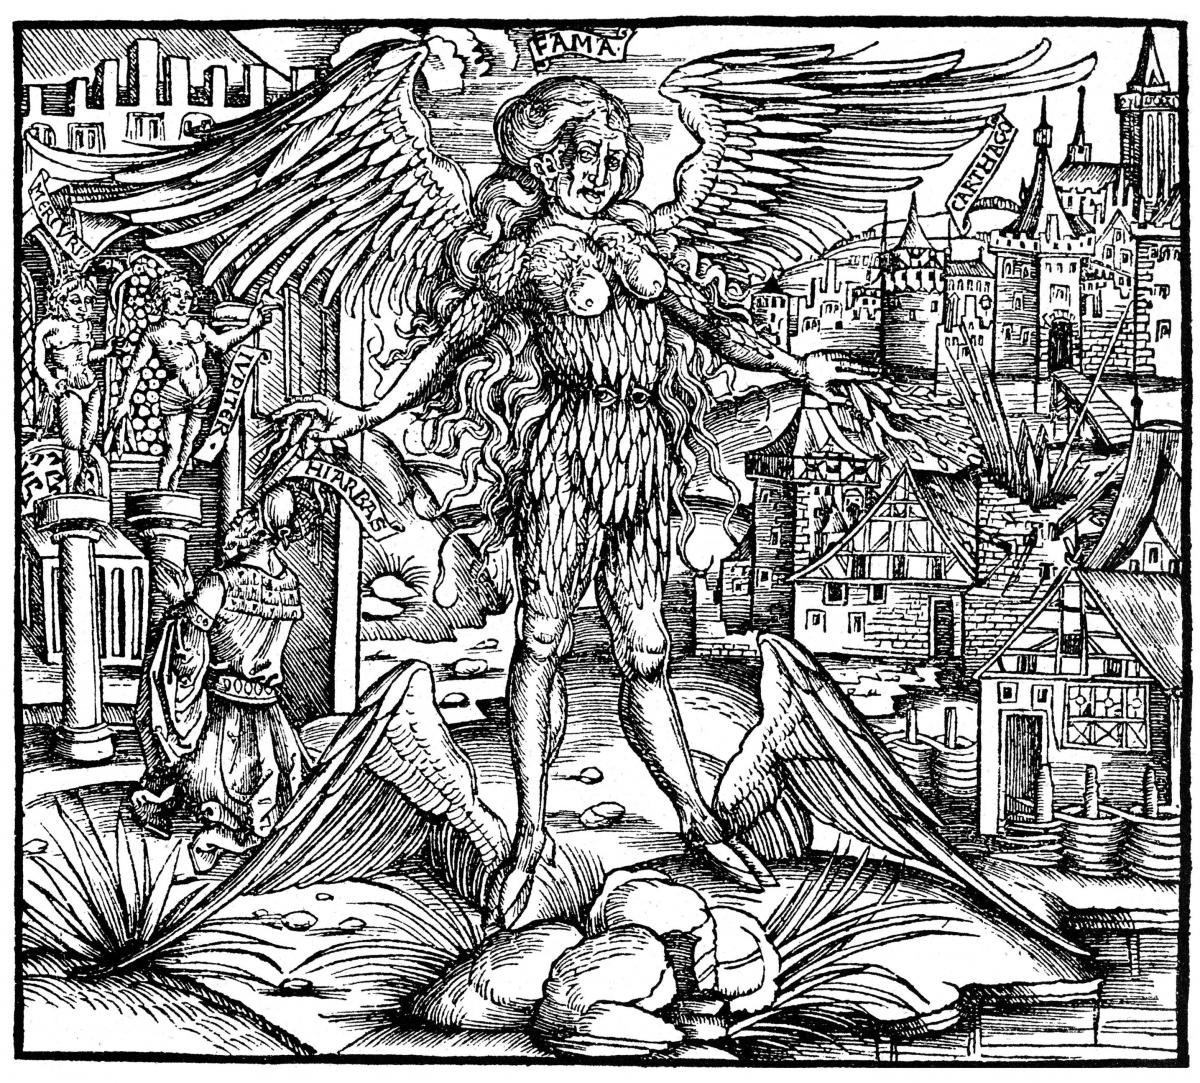 Illustration of Rumor, or Fama, a winged female monster who appears in the Aeneid